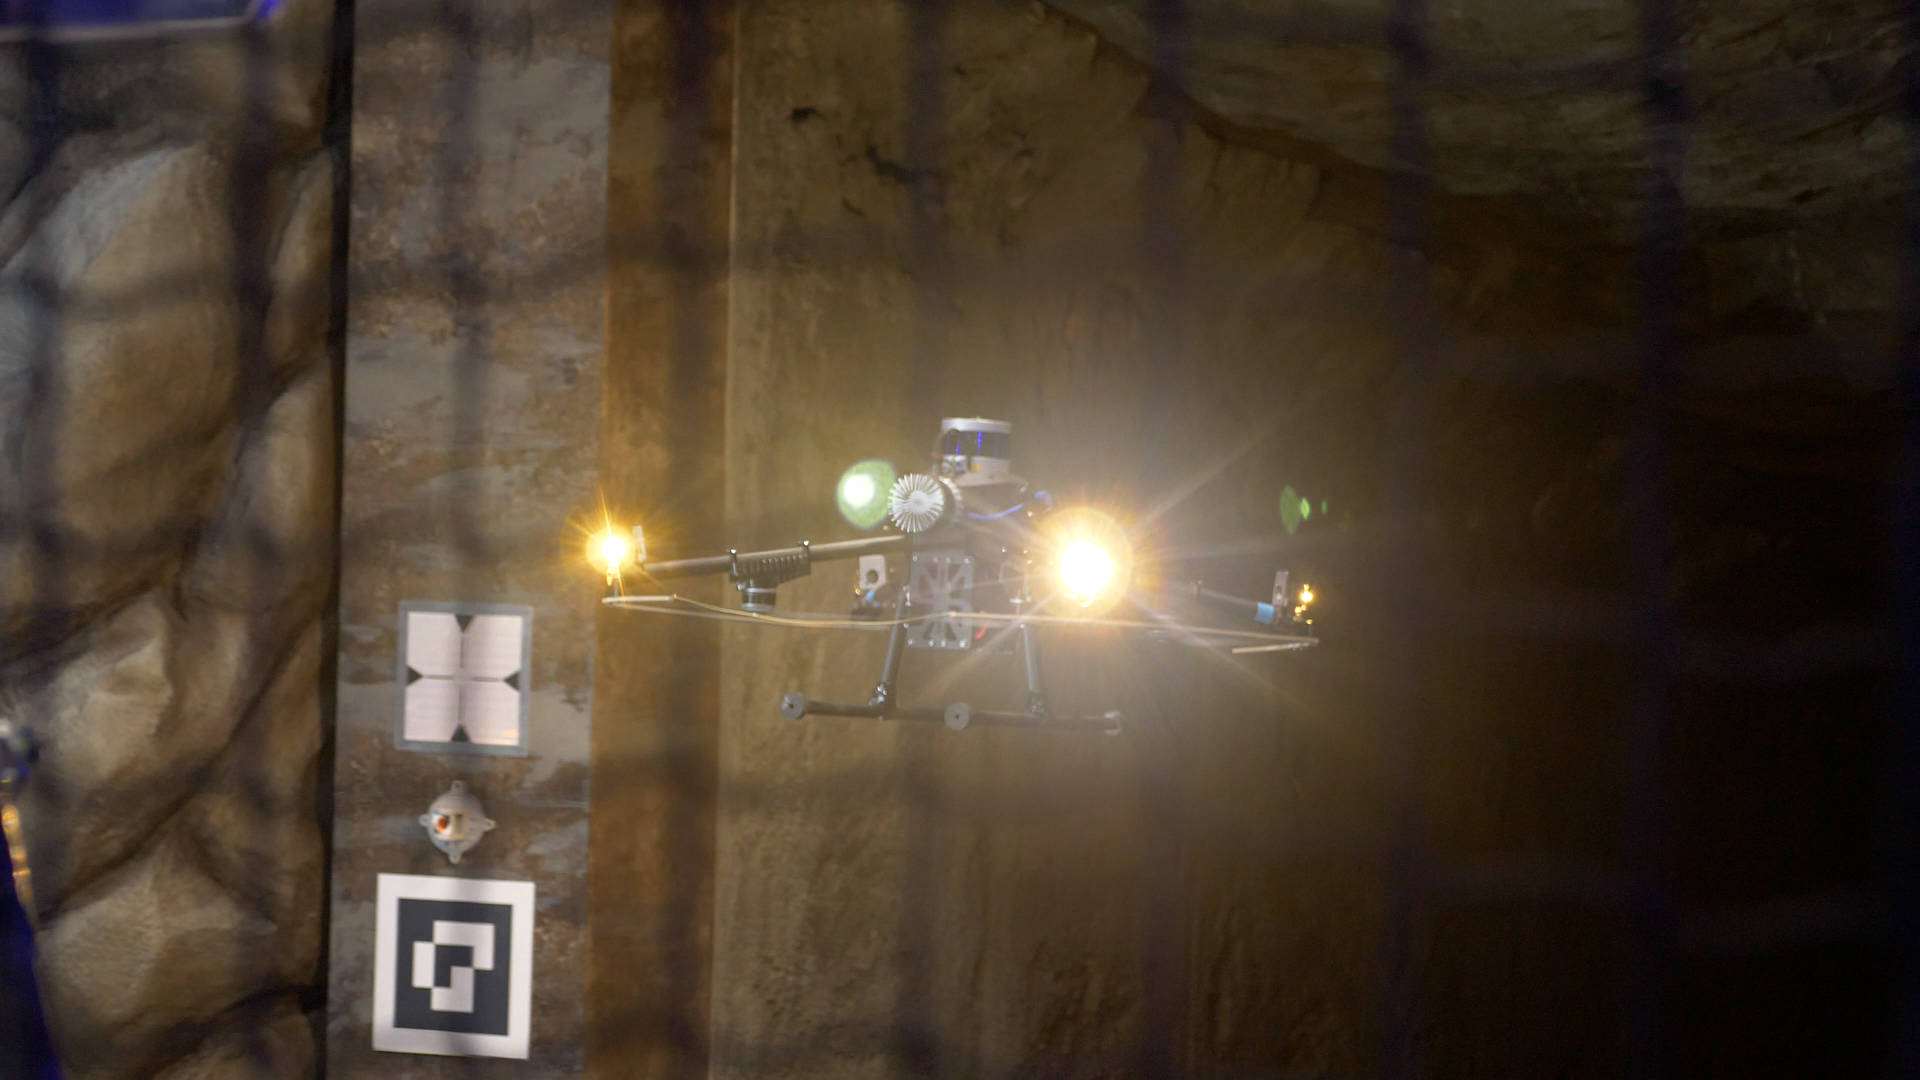 A U.S. Government-funded competition has seen autonomous robots battling against each other in an underground cave complex. 

The DARPA Subterranean (SubT) Challenge took place at the Louisville Mega Cavern September 21-24, 2021. DARPA – the Defense Advanced Research Projects Agency – is a research and development agency of the U.S. Department of Defense responsible for the development of emerging technologies for use by the military. 

With $5 million in total prize money at stake, competitors were tasked with entering robots that could navigate courses and obstacles. 

Teams in the Systems Competition element of the event developed a wide variety of robotic systems to advance and evaluate novel mapping and navigation solutions for application in realistic field environments, such as human-made tunnels, urban underground settings, and caves. 

The Systems Competition involved physical robots and a Virtual Competition took place in simulated underground worlds. Four of the teams competed in both competitions. 

Teams in the Virtual Competition developed software and algorithms using virtual models of systems, environments, and terrain to compete in simulation-based events, and explore simulated environments. 

CERBERUS won the Systems Competition and Dynamo topped the leaderboard in the Virtual Competition as roboticists and engineers from eleven countries participated in the Final Event. The Systems and Virtual winners won $2 million and $750,000, respectively. 

“In time-sensitive missions, such as active combat operations or disaster response, warfighters and first responders face difficult terrain, unstable structures, degraded environmental conditions, severe communication constraints, and expansive areas of operation,” said Timothy Chung, program manager of the SubT Challenge. “The Challenge has helped to significantly advance technological tools for tackling these impediments and safeguarding lives.” 

Since the SubT Challenge began in 2018, teams